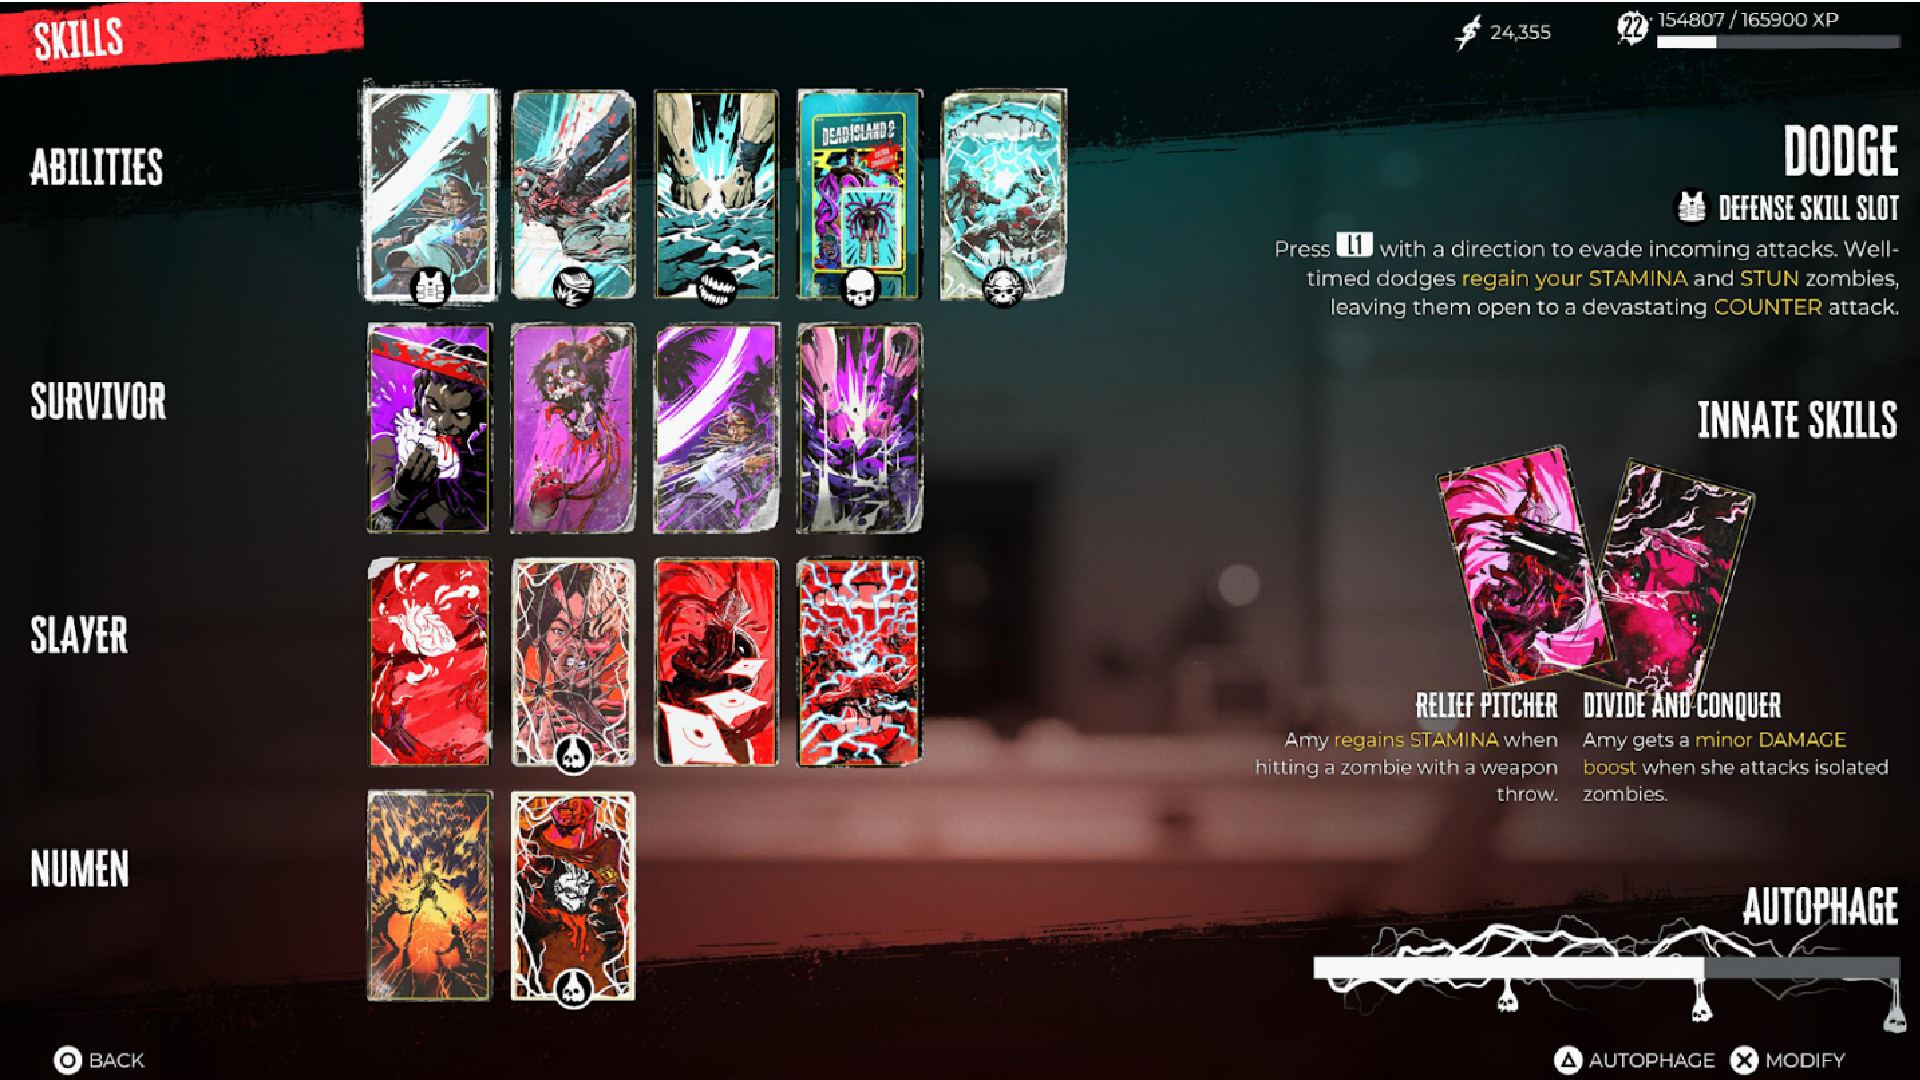 Dead Island 2 best skills Amy: Amy's skill card deck can be seen